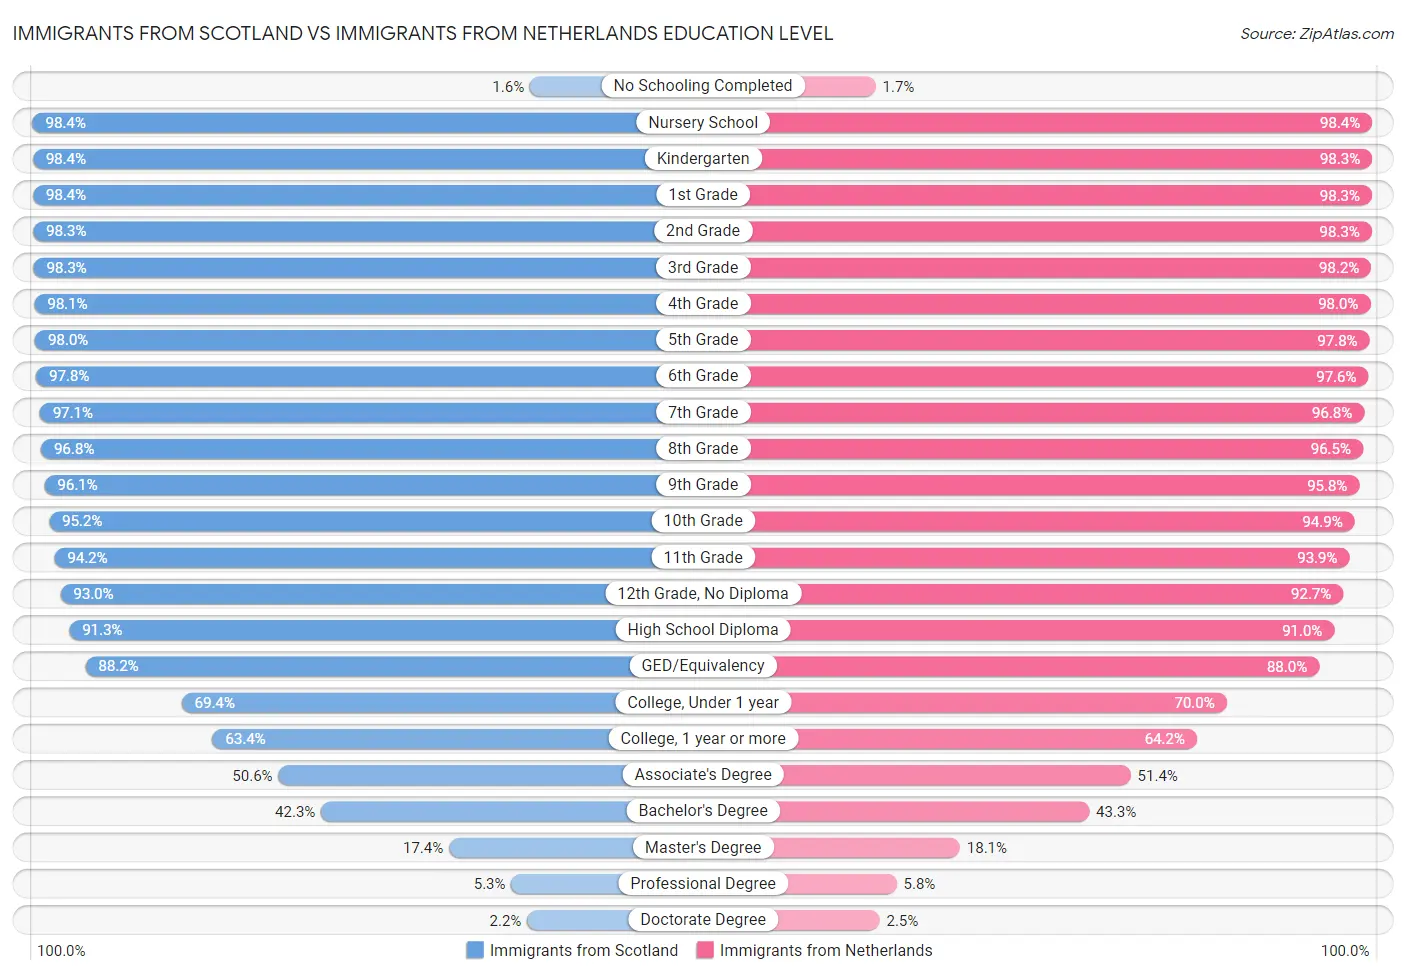 Immigrants from Scotland vs Immigrants from Netherlands Education Level